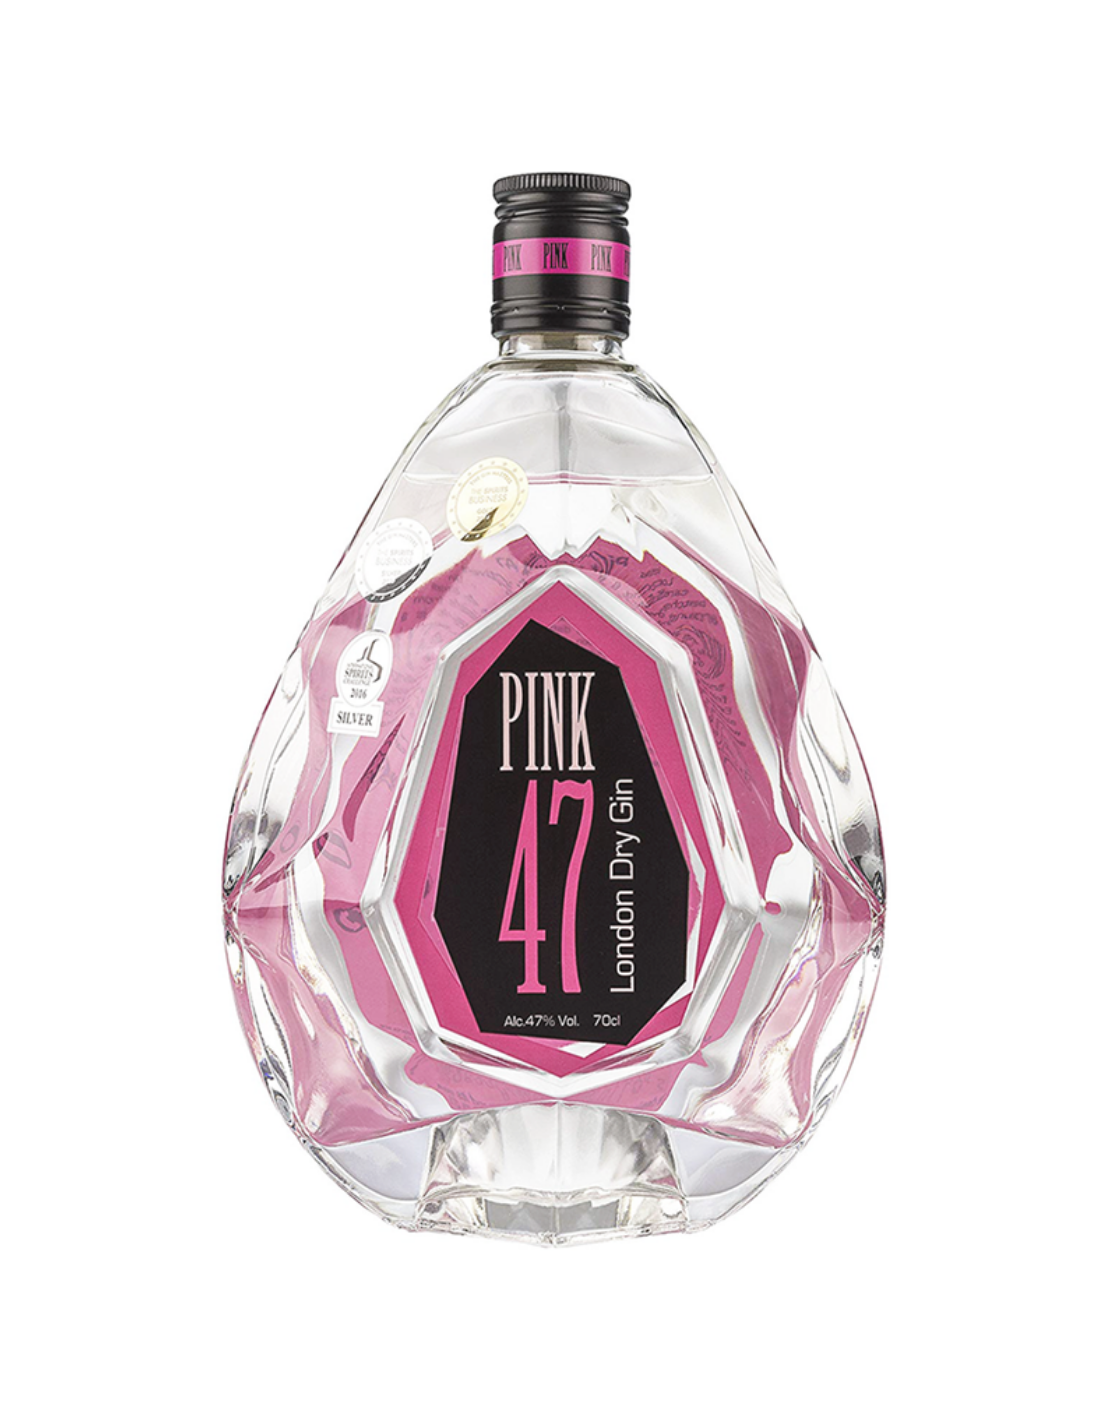 Gin Pink 47 London Dry, 47% alc., 0.7L, Anglia alcooldiscount.ro